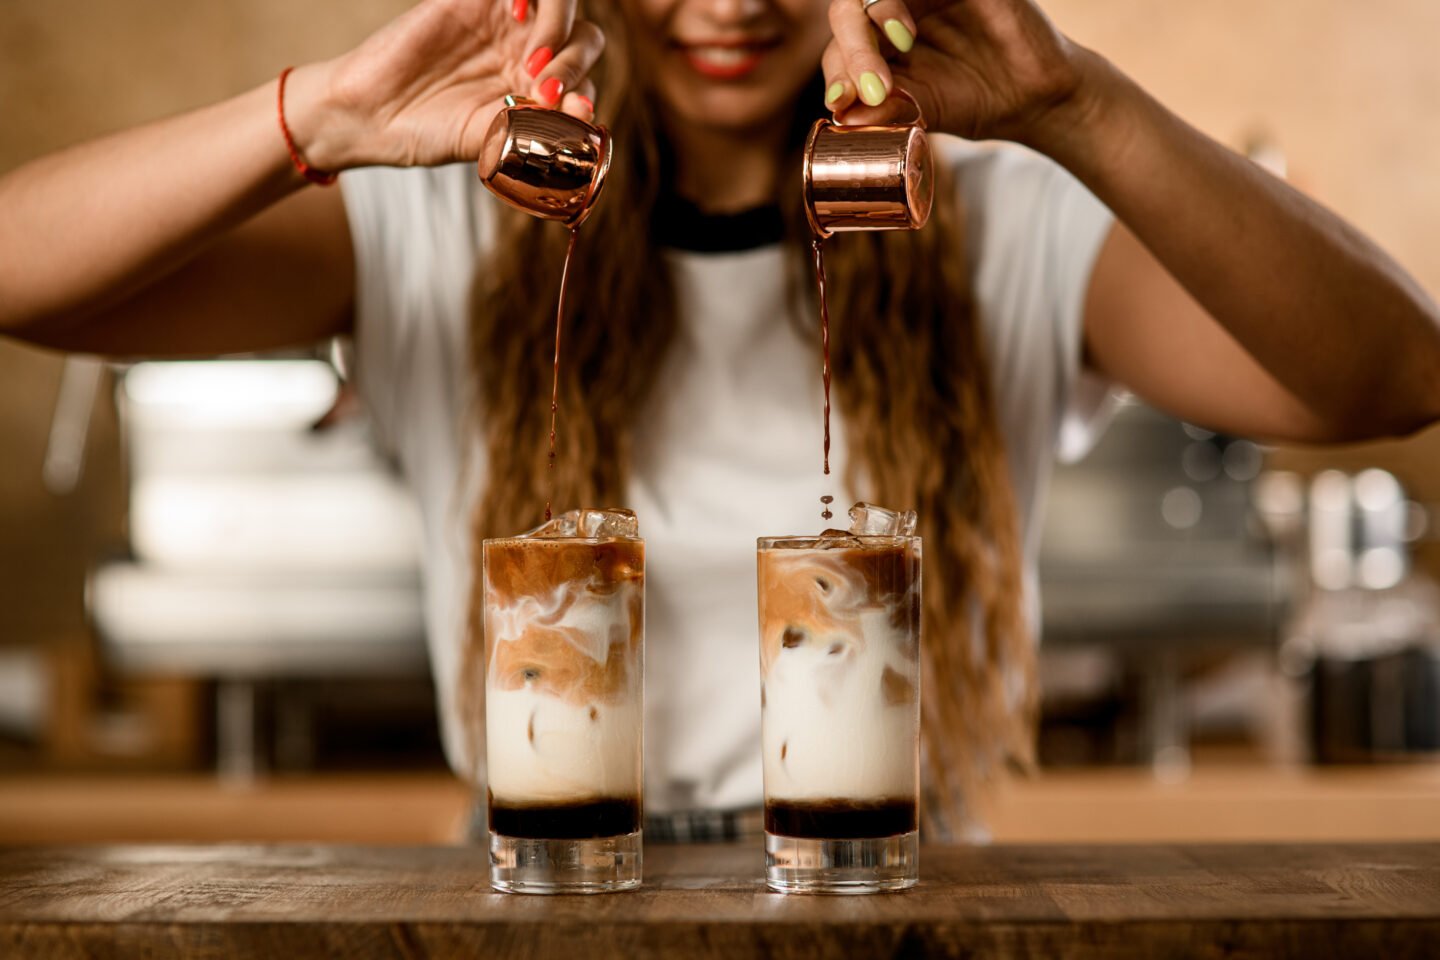 woman-carefully-pours-espresso-from-cups-into-glasses-with-milk-and-syrup